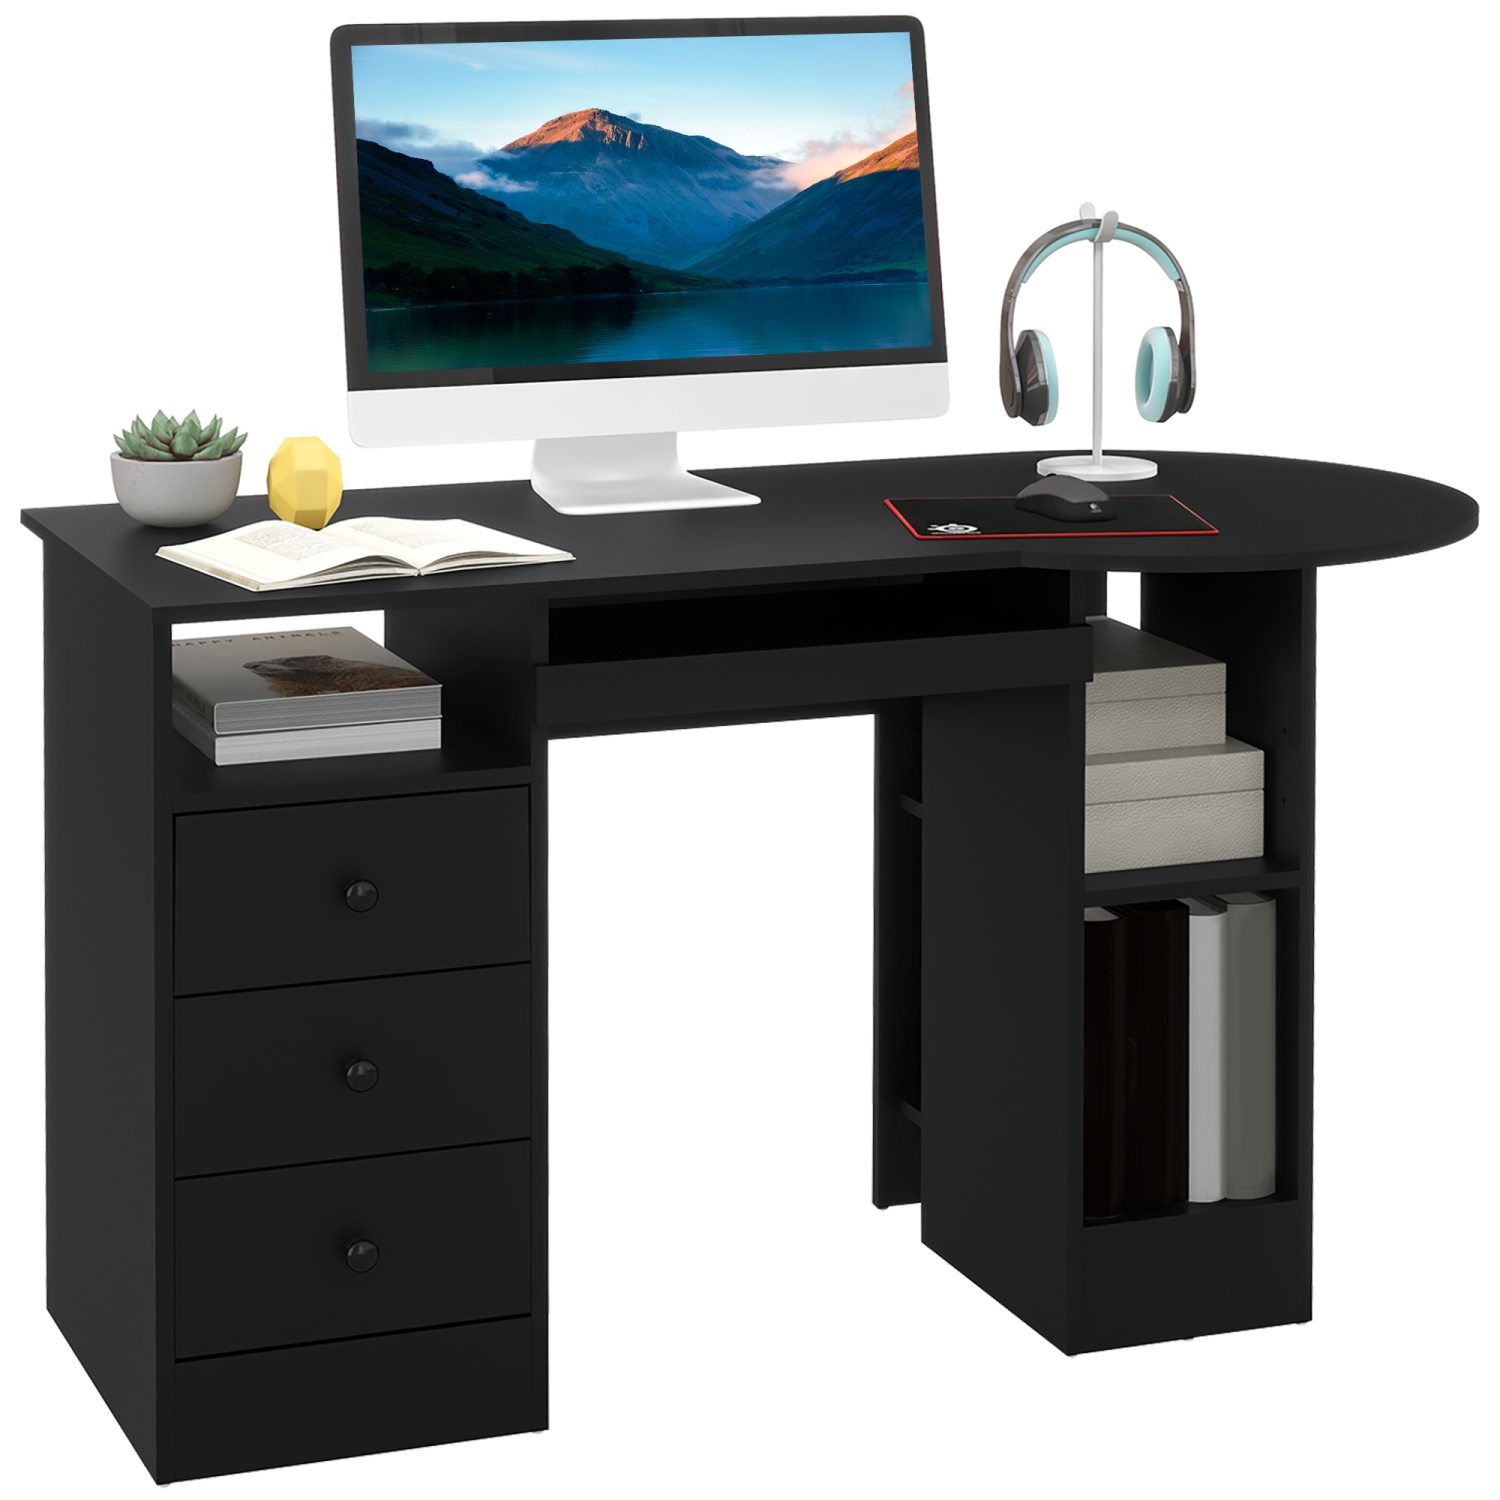 HOMCOM Computer Desk with Storage, Home Office Laptop Table with Shelves and Drawers, Modern Workstation Desk with Keyboard Tray for Study, Living Room, Black